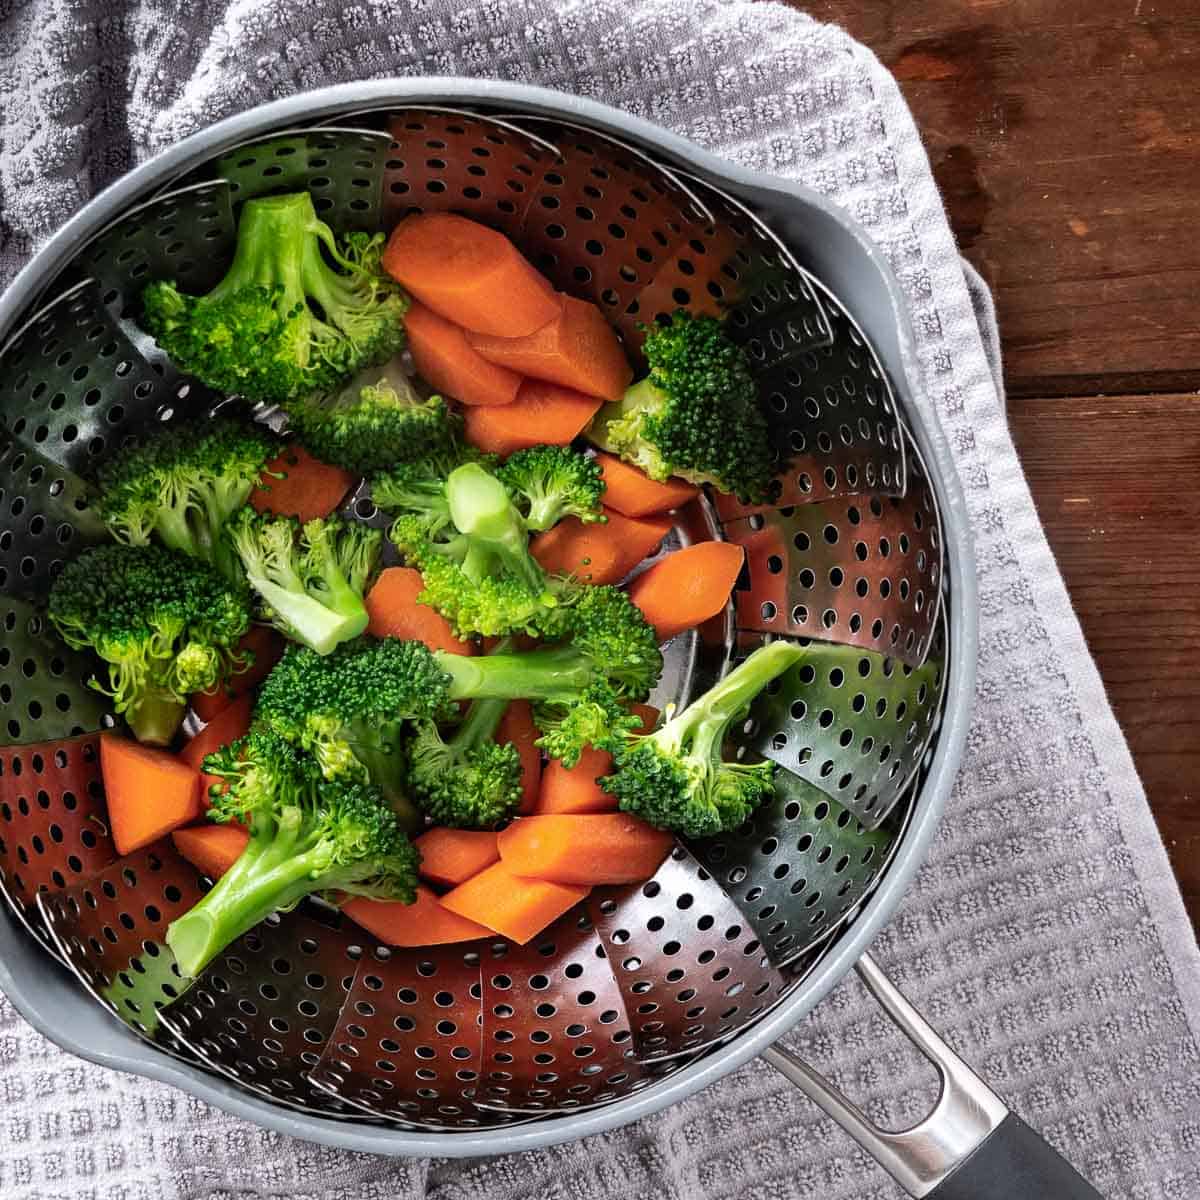 Steamed broccoli and carrots in a saucpan.